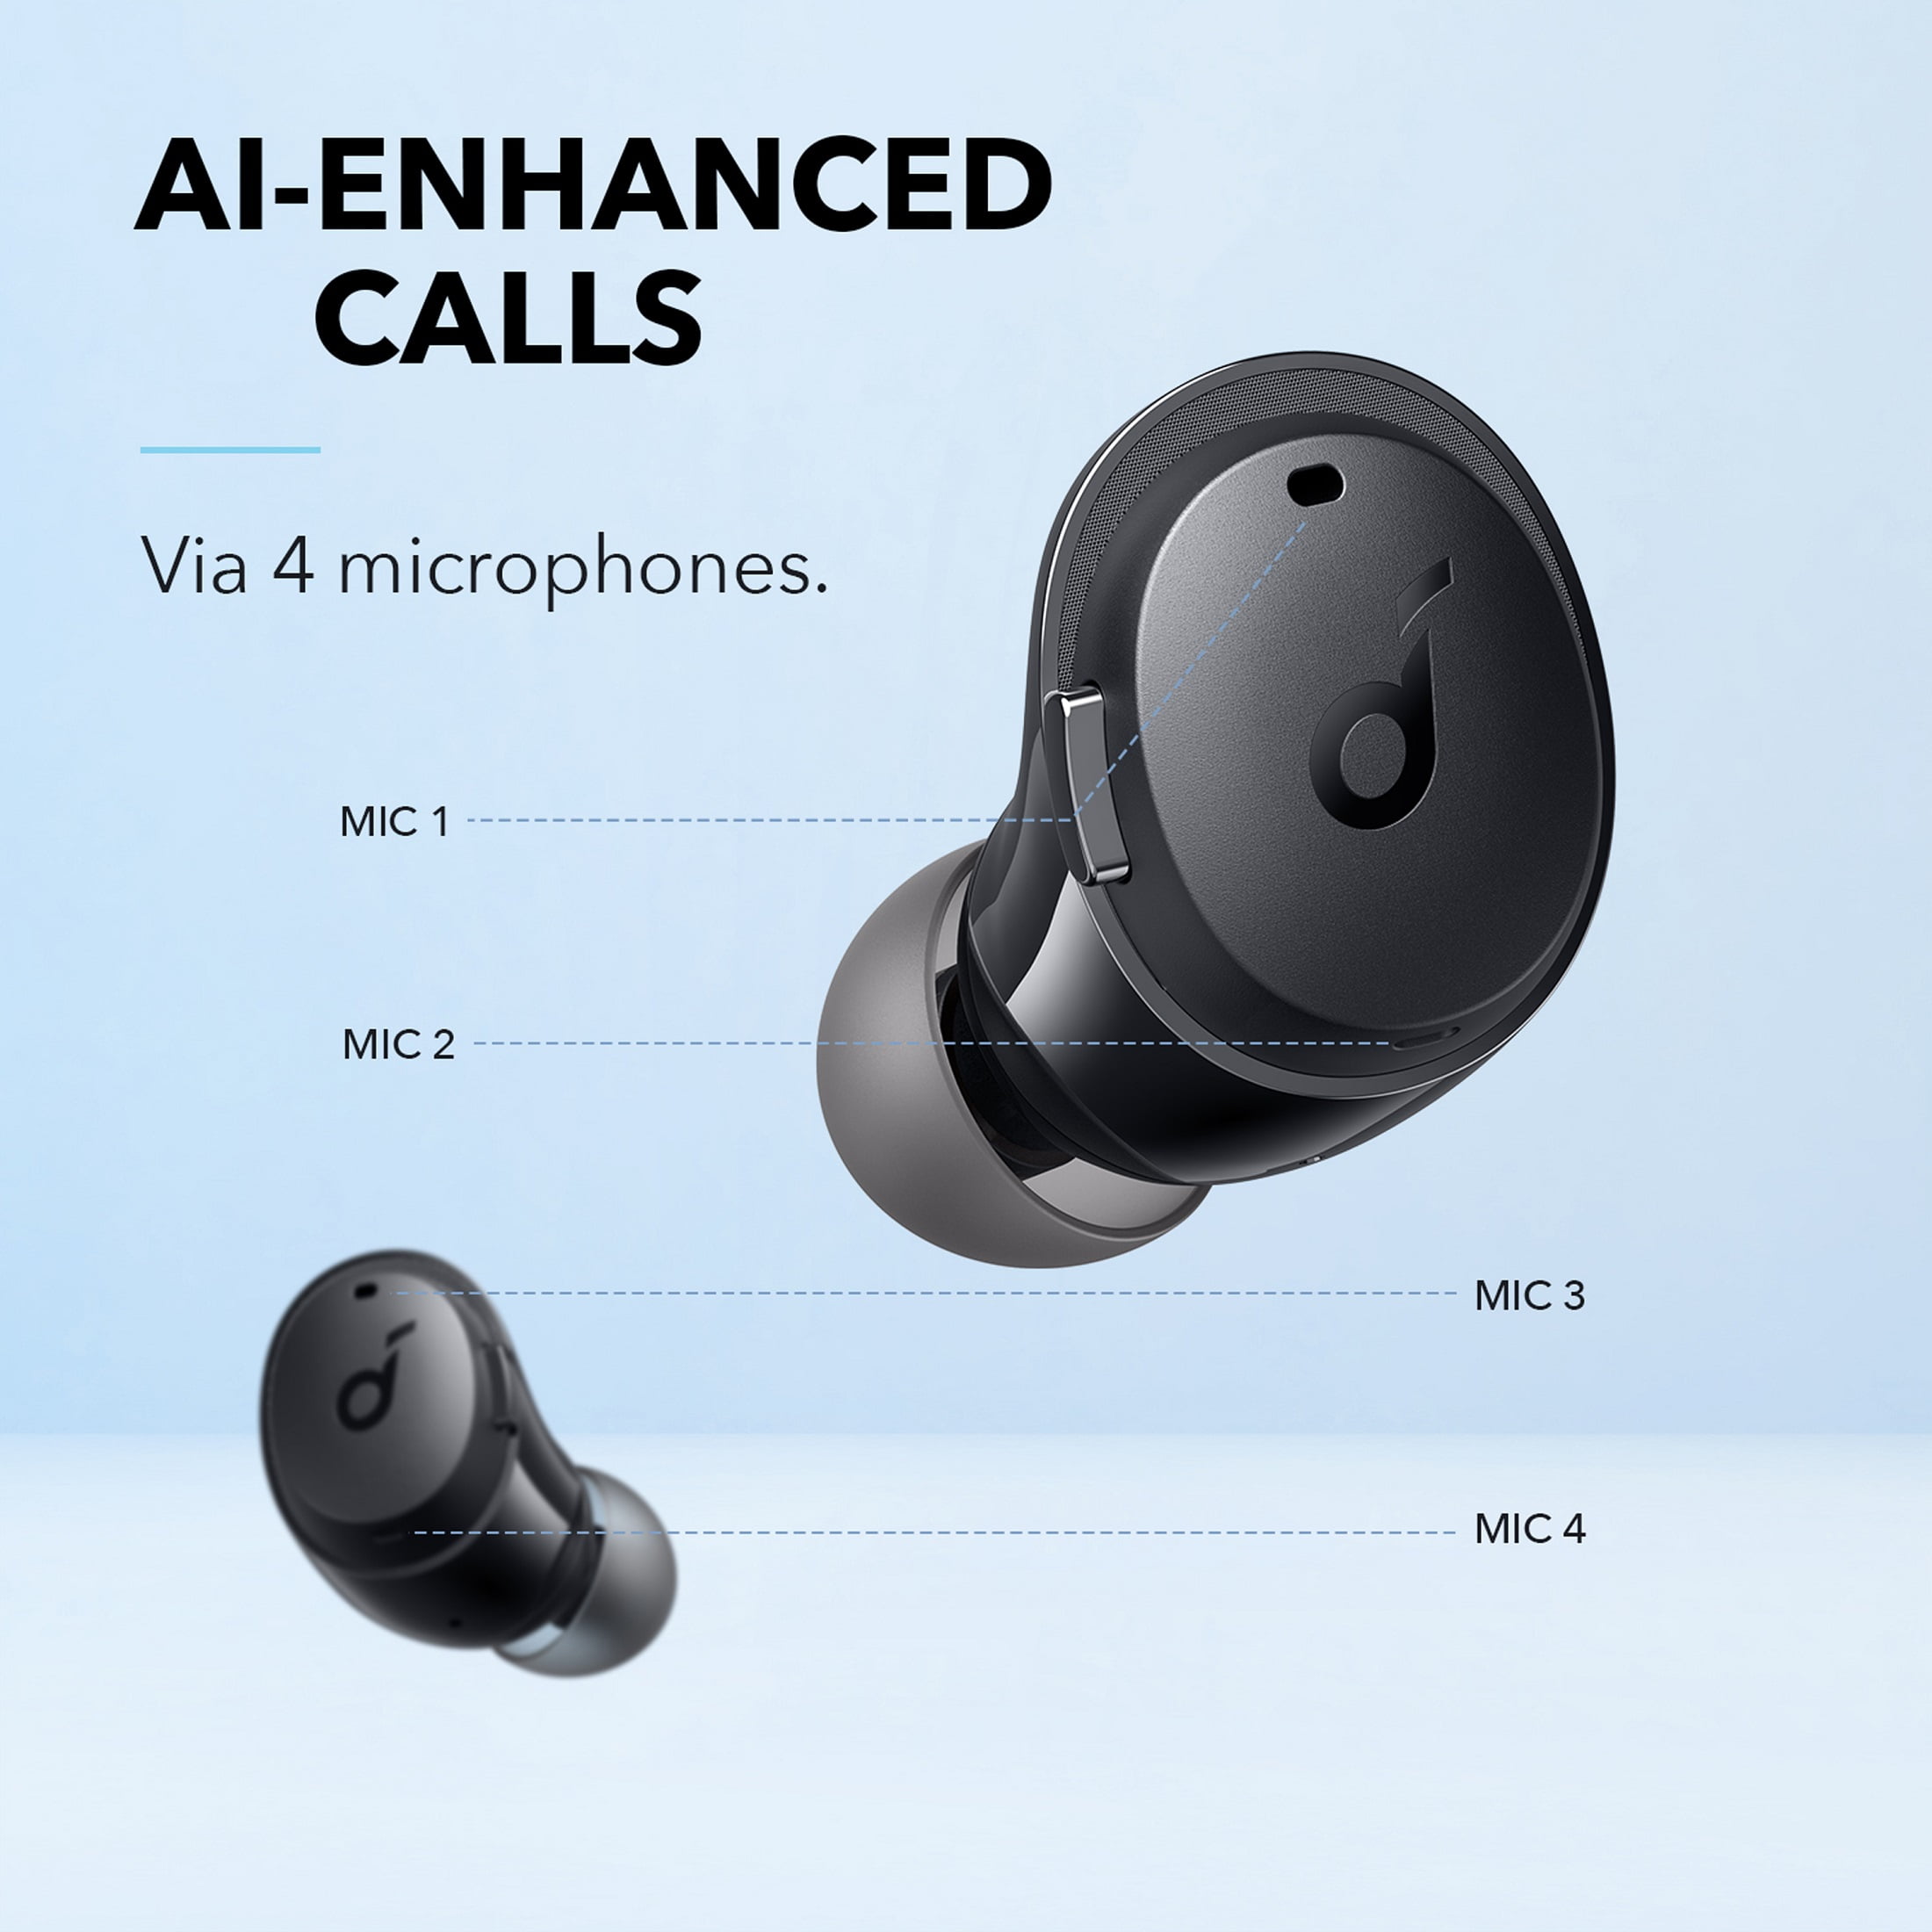 soundcore by Anker- Life Dot 3i Earbuds True Wireless ANC Headphones,  9/36-Hour Playtime, IPX5, Black